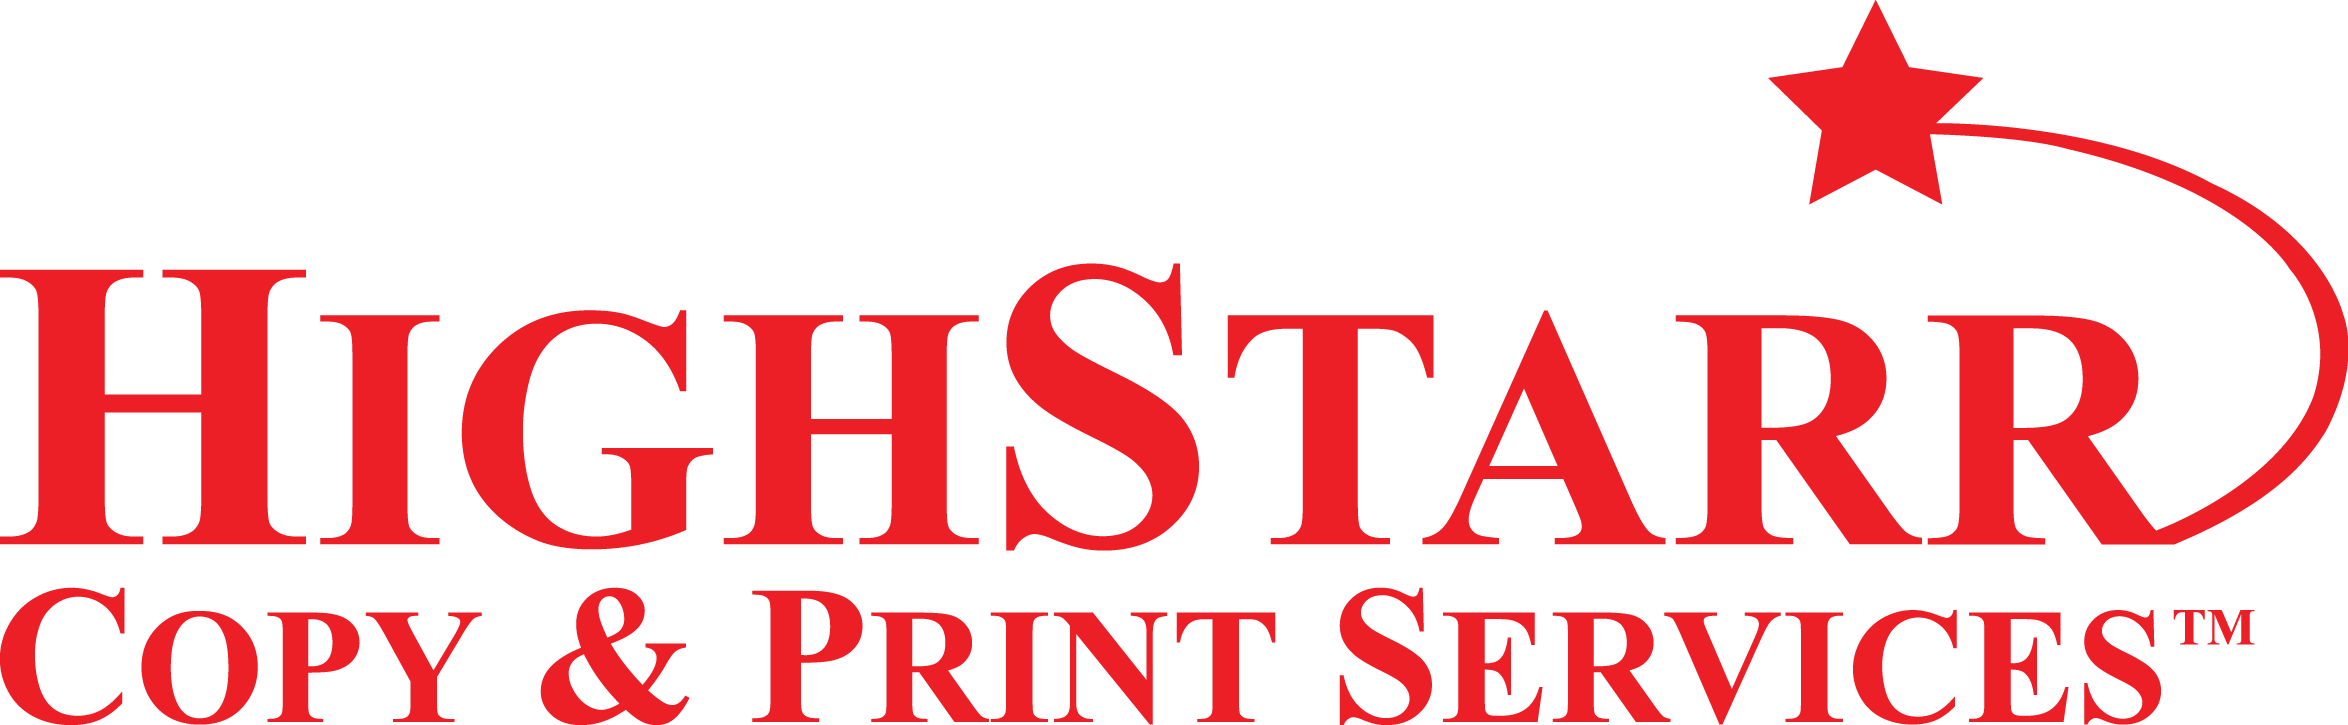 Highstart Copy and Print Services